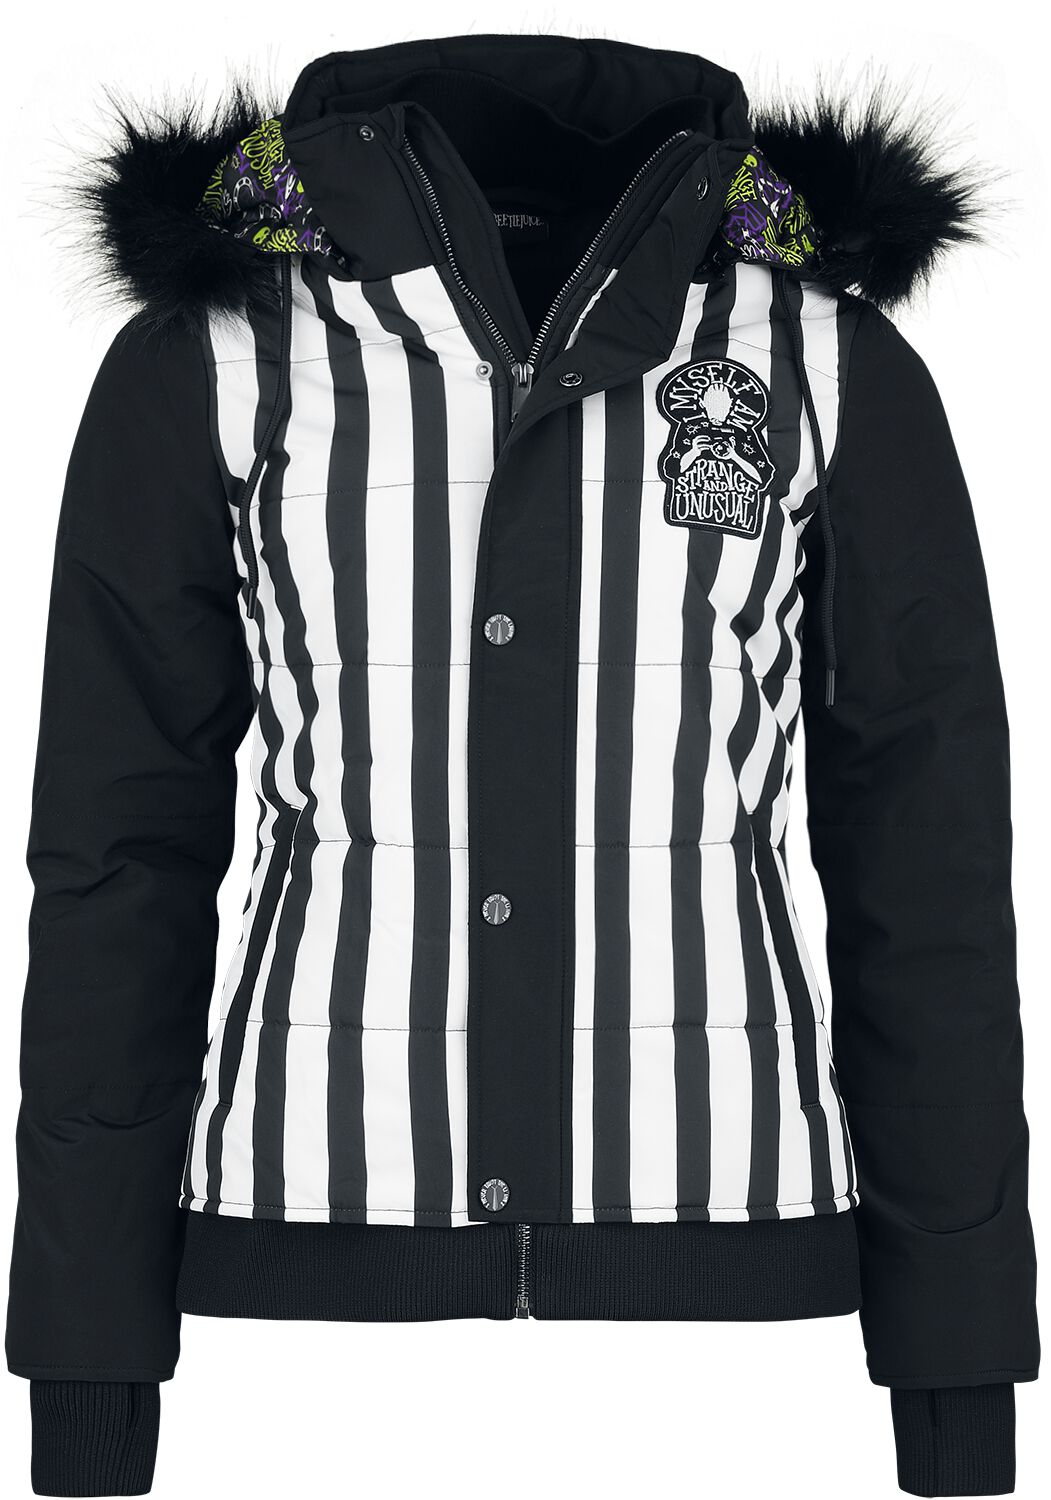 Image of Giacca invernale di Beetlejuice - Beetle - S a XXL - Donna - multicolore